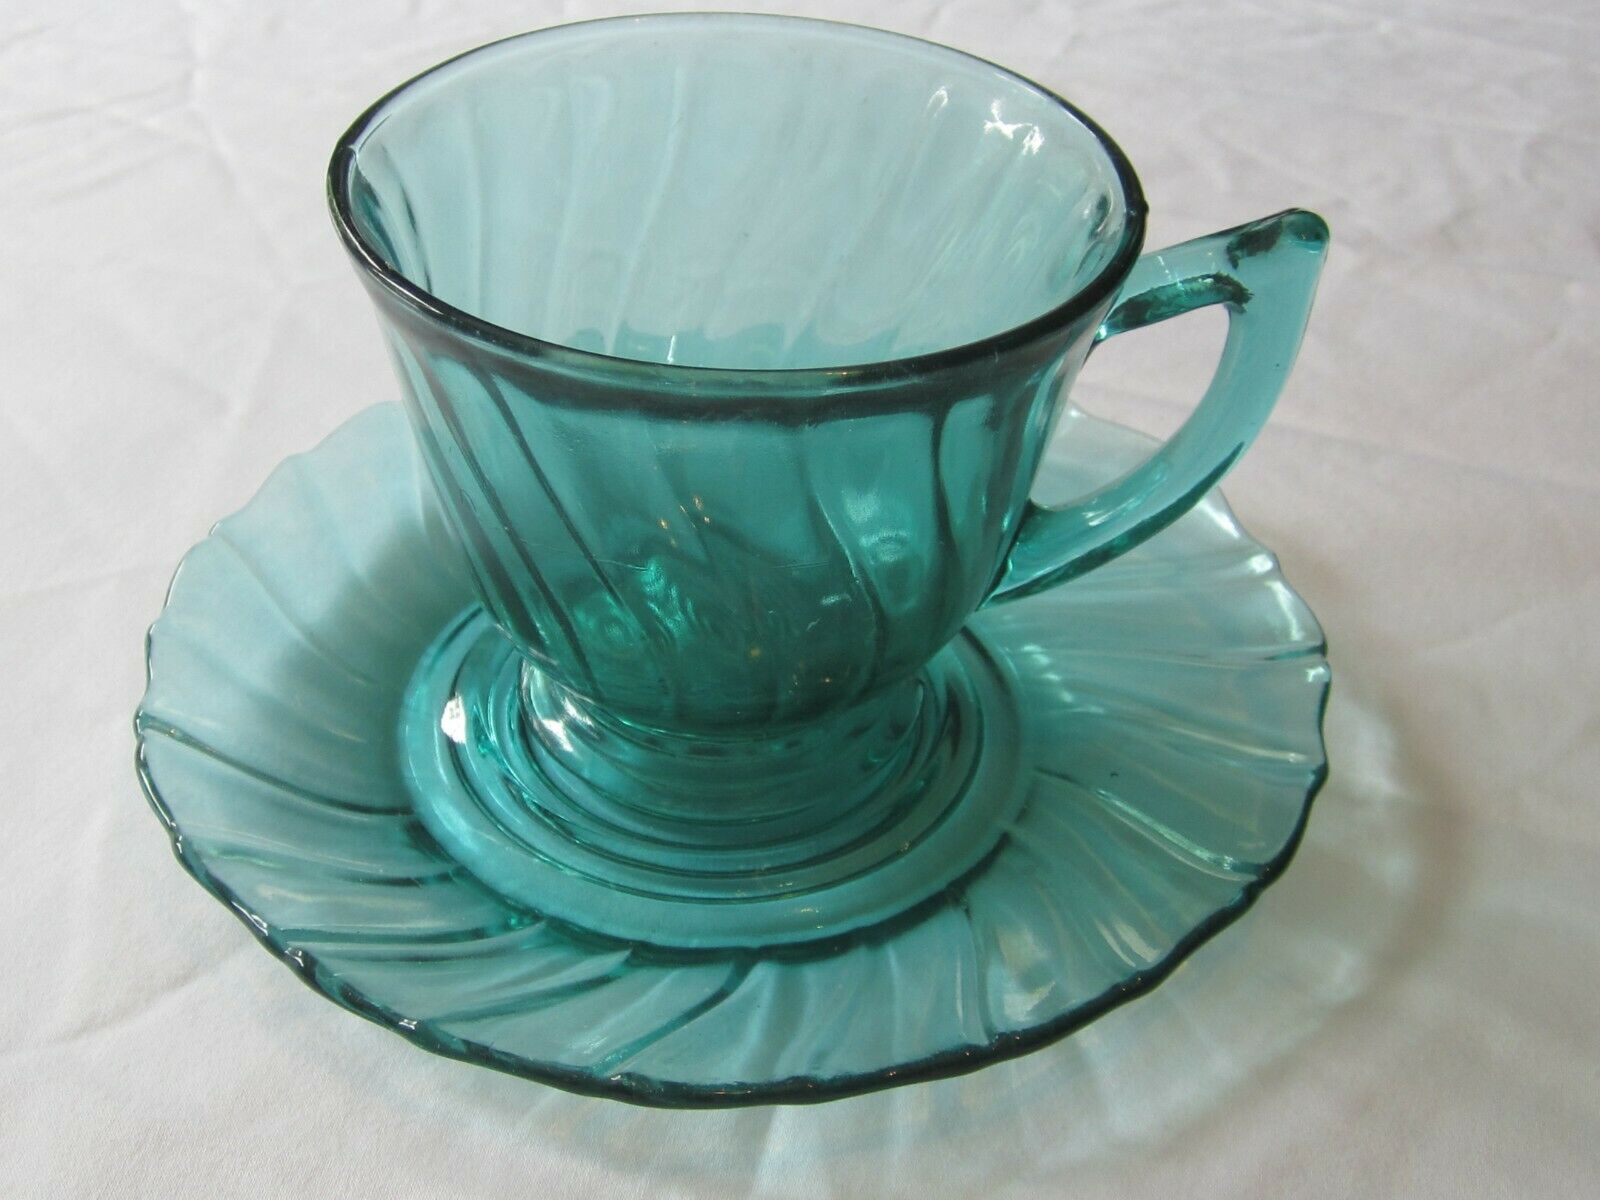 Depression Glass Jeannette Swirl Ultramarine: Cup And Saucer Set(s)